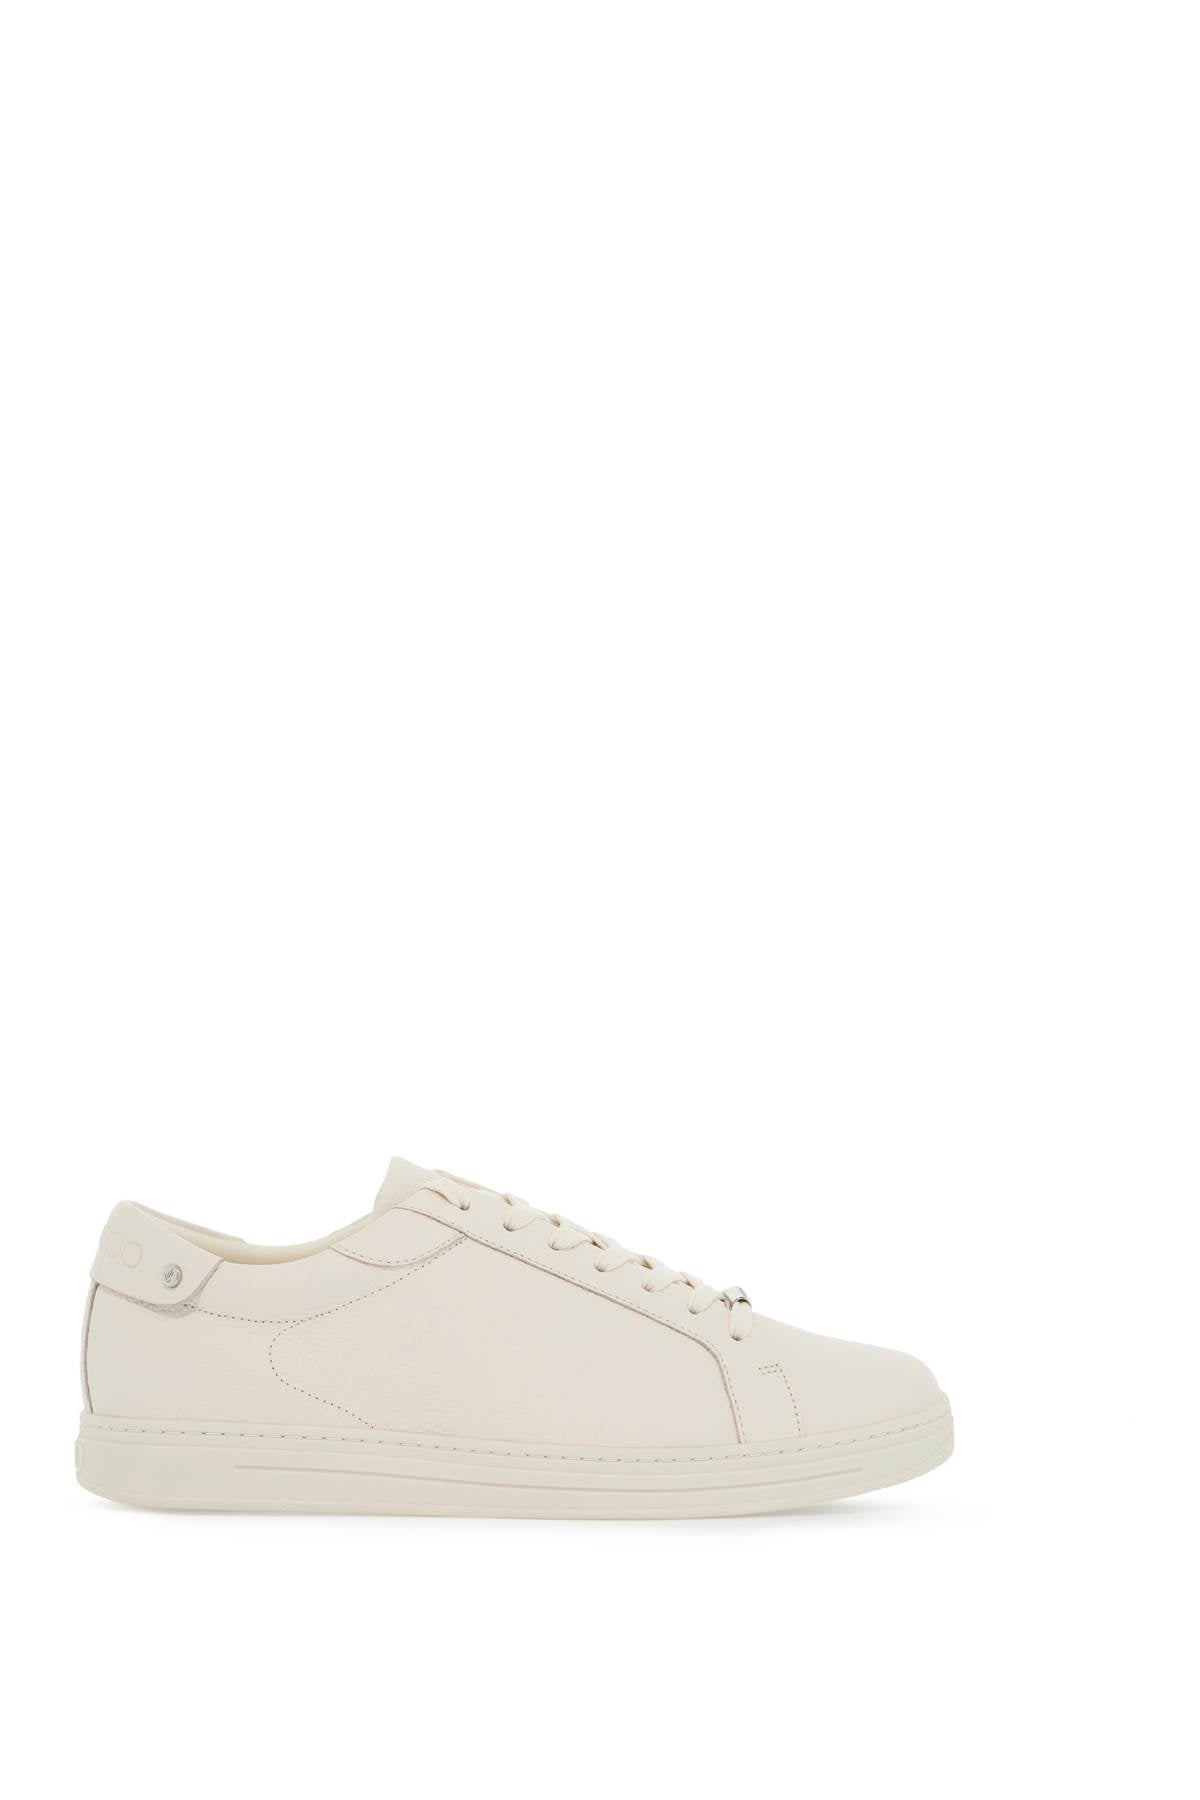 "hammered leather rome sneakers ROME M GBX V LATTE